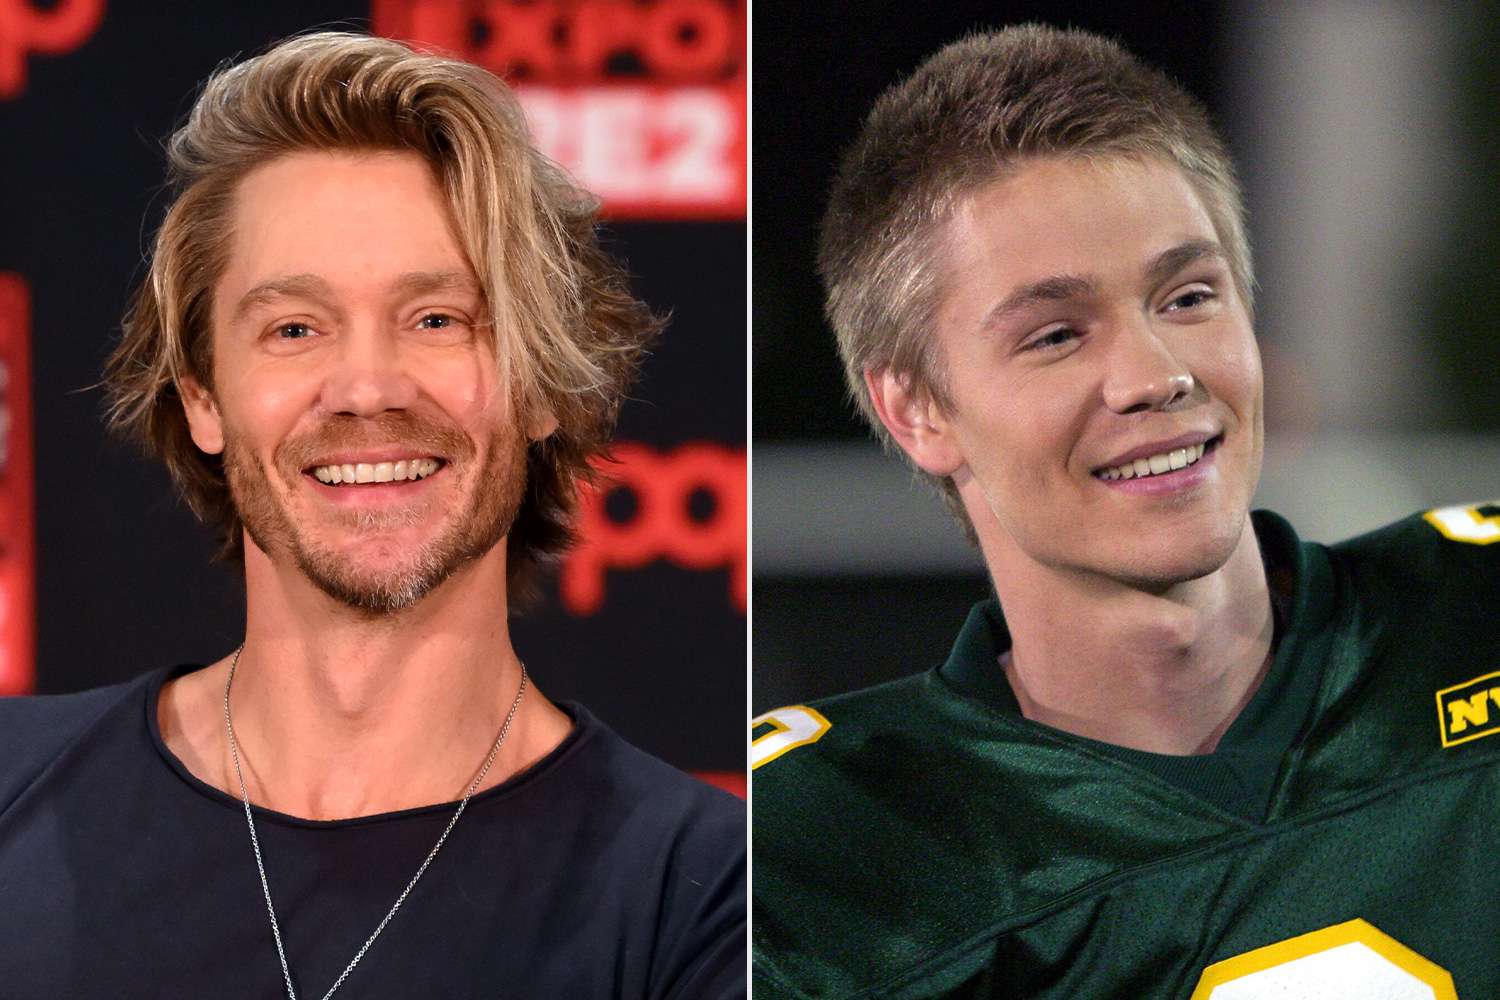 Chad Michael Murray Teases a Surprise Coming Up for “A Cinderella Story”'s 20th Anniversary